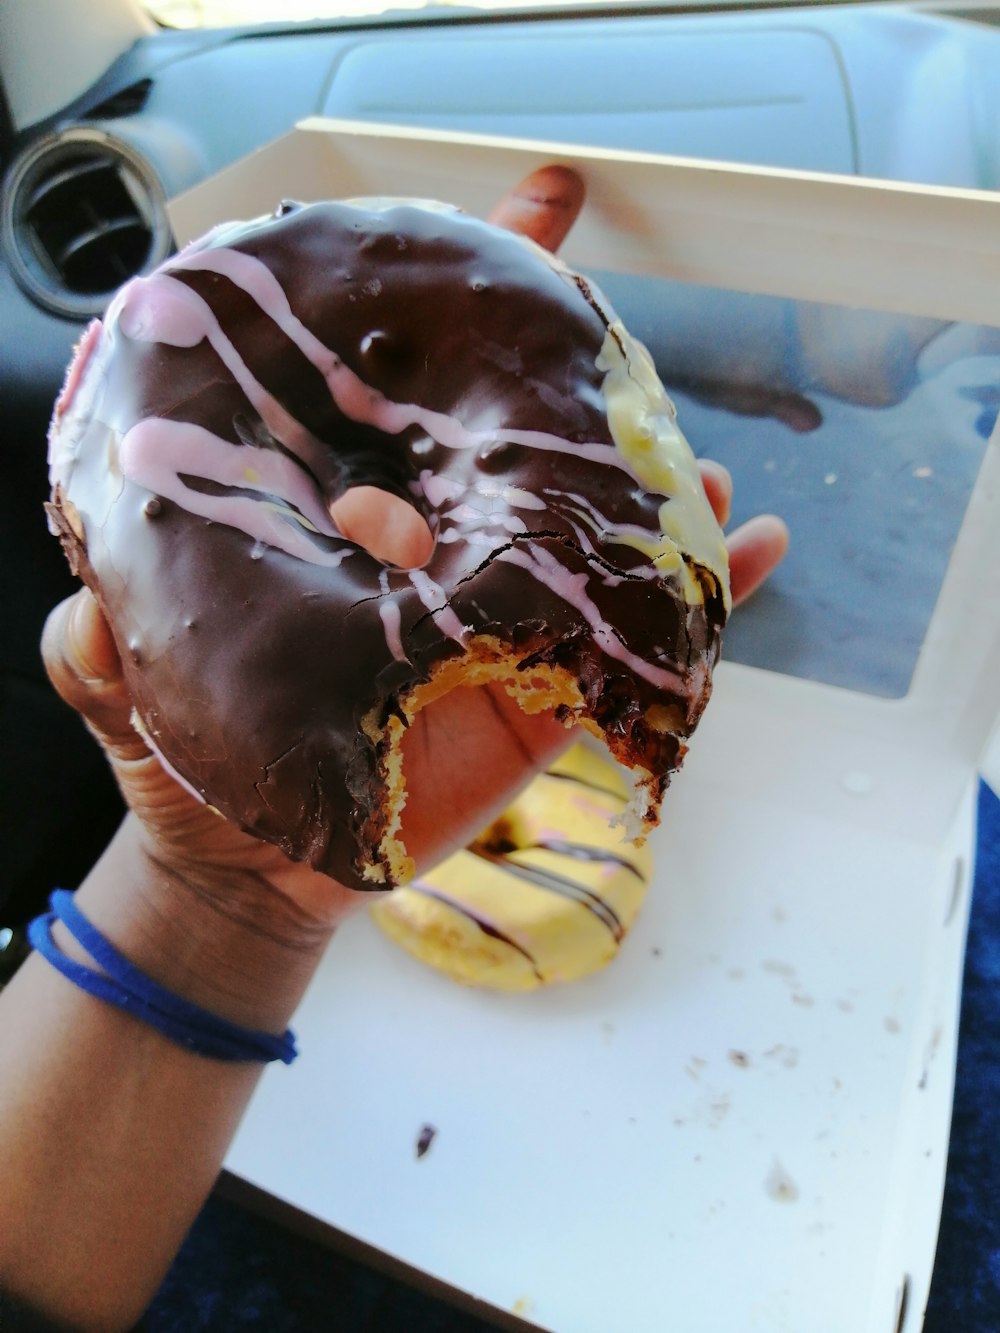 a person holding a chocolate covered doughnut in their hand